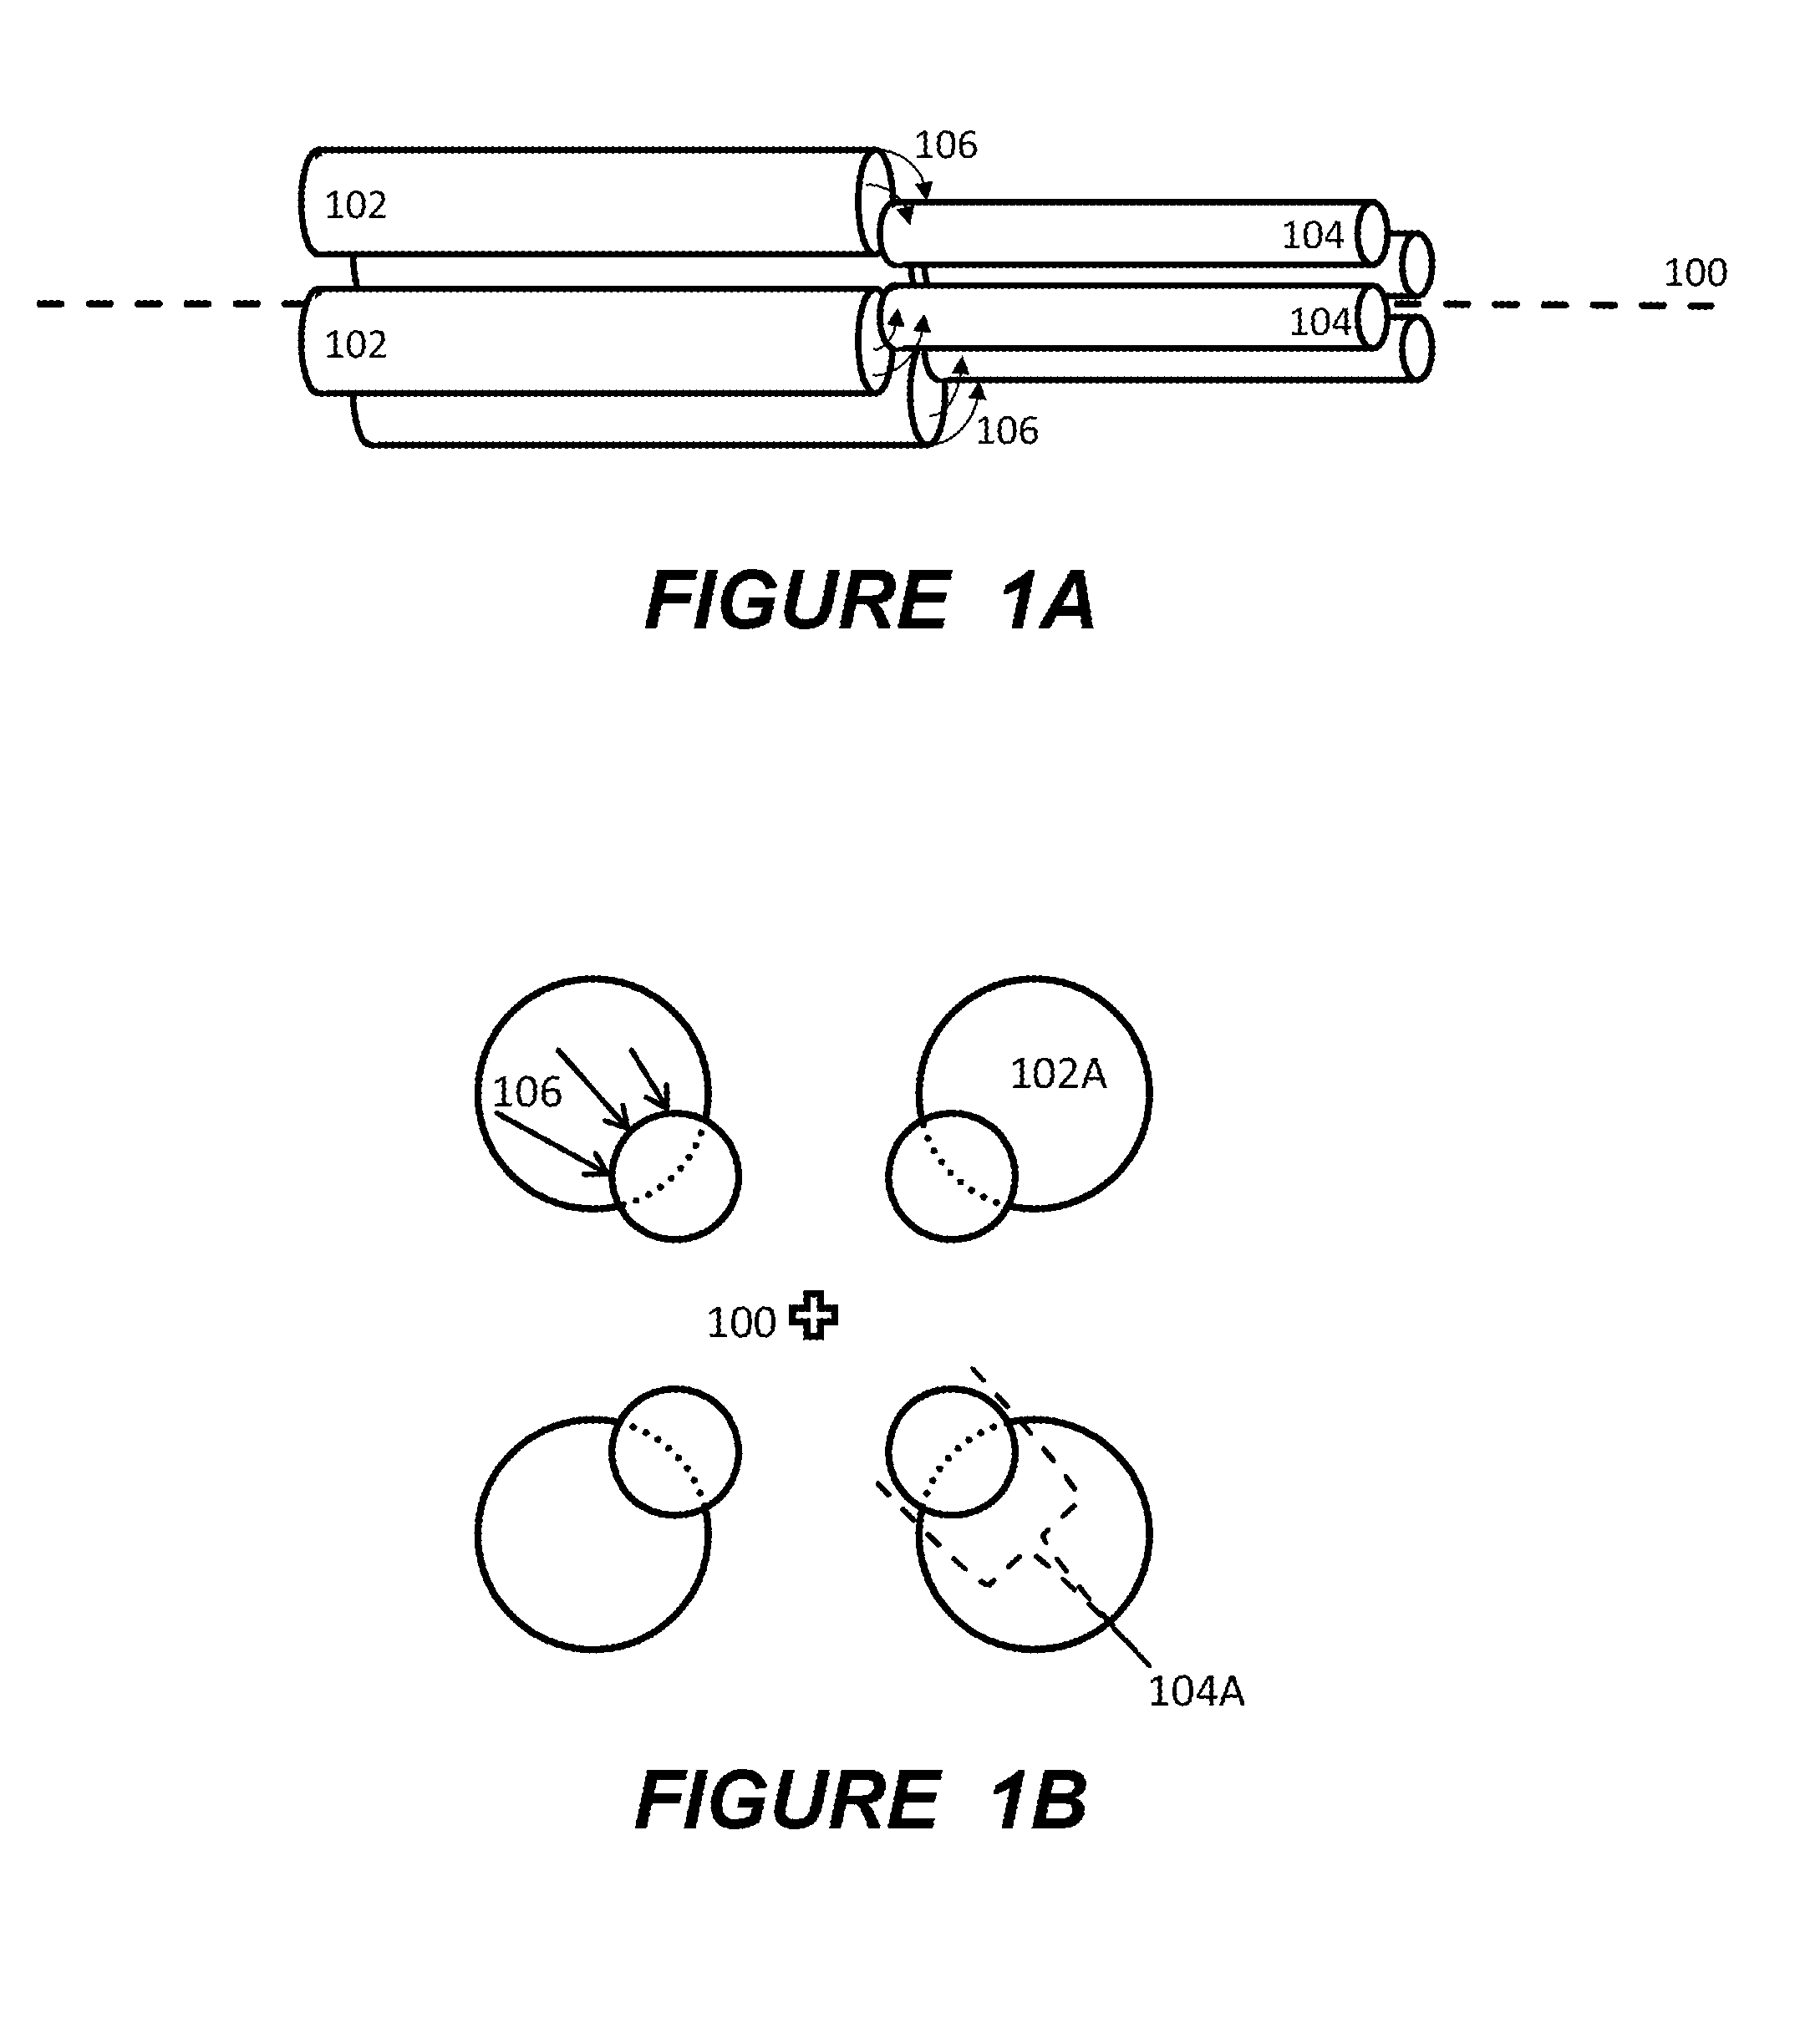 Reduction of cross-talk between RF components in a mass spectrometer